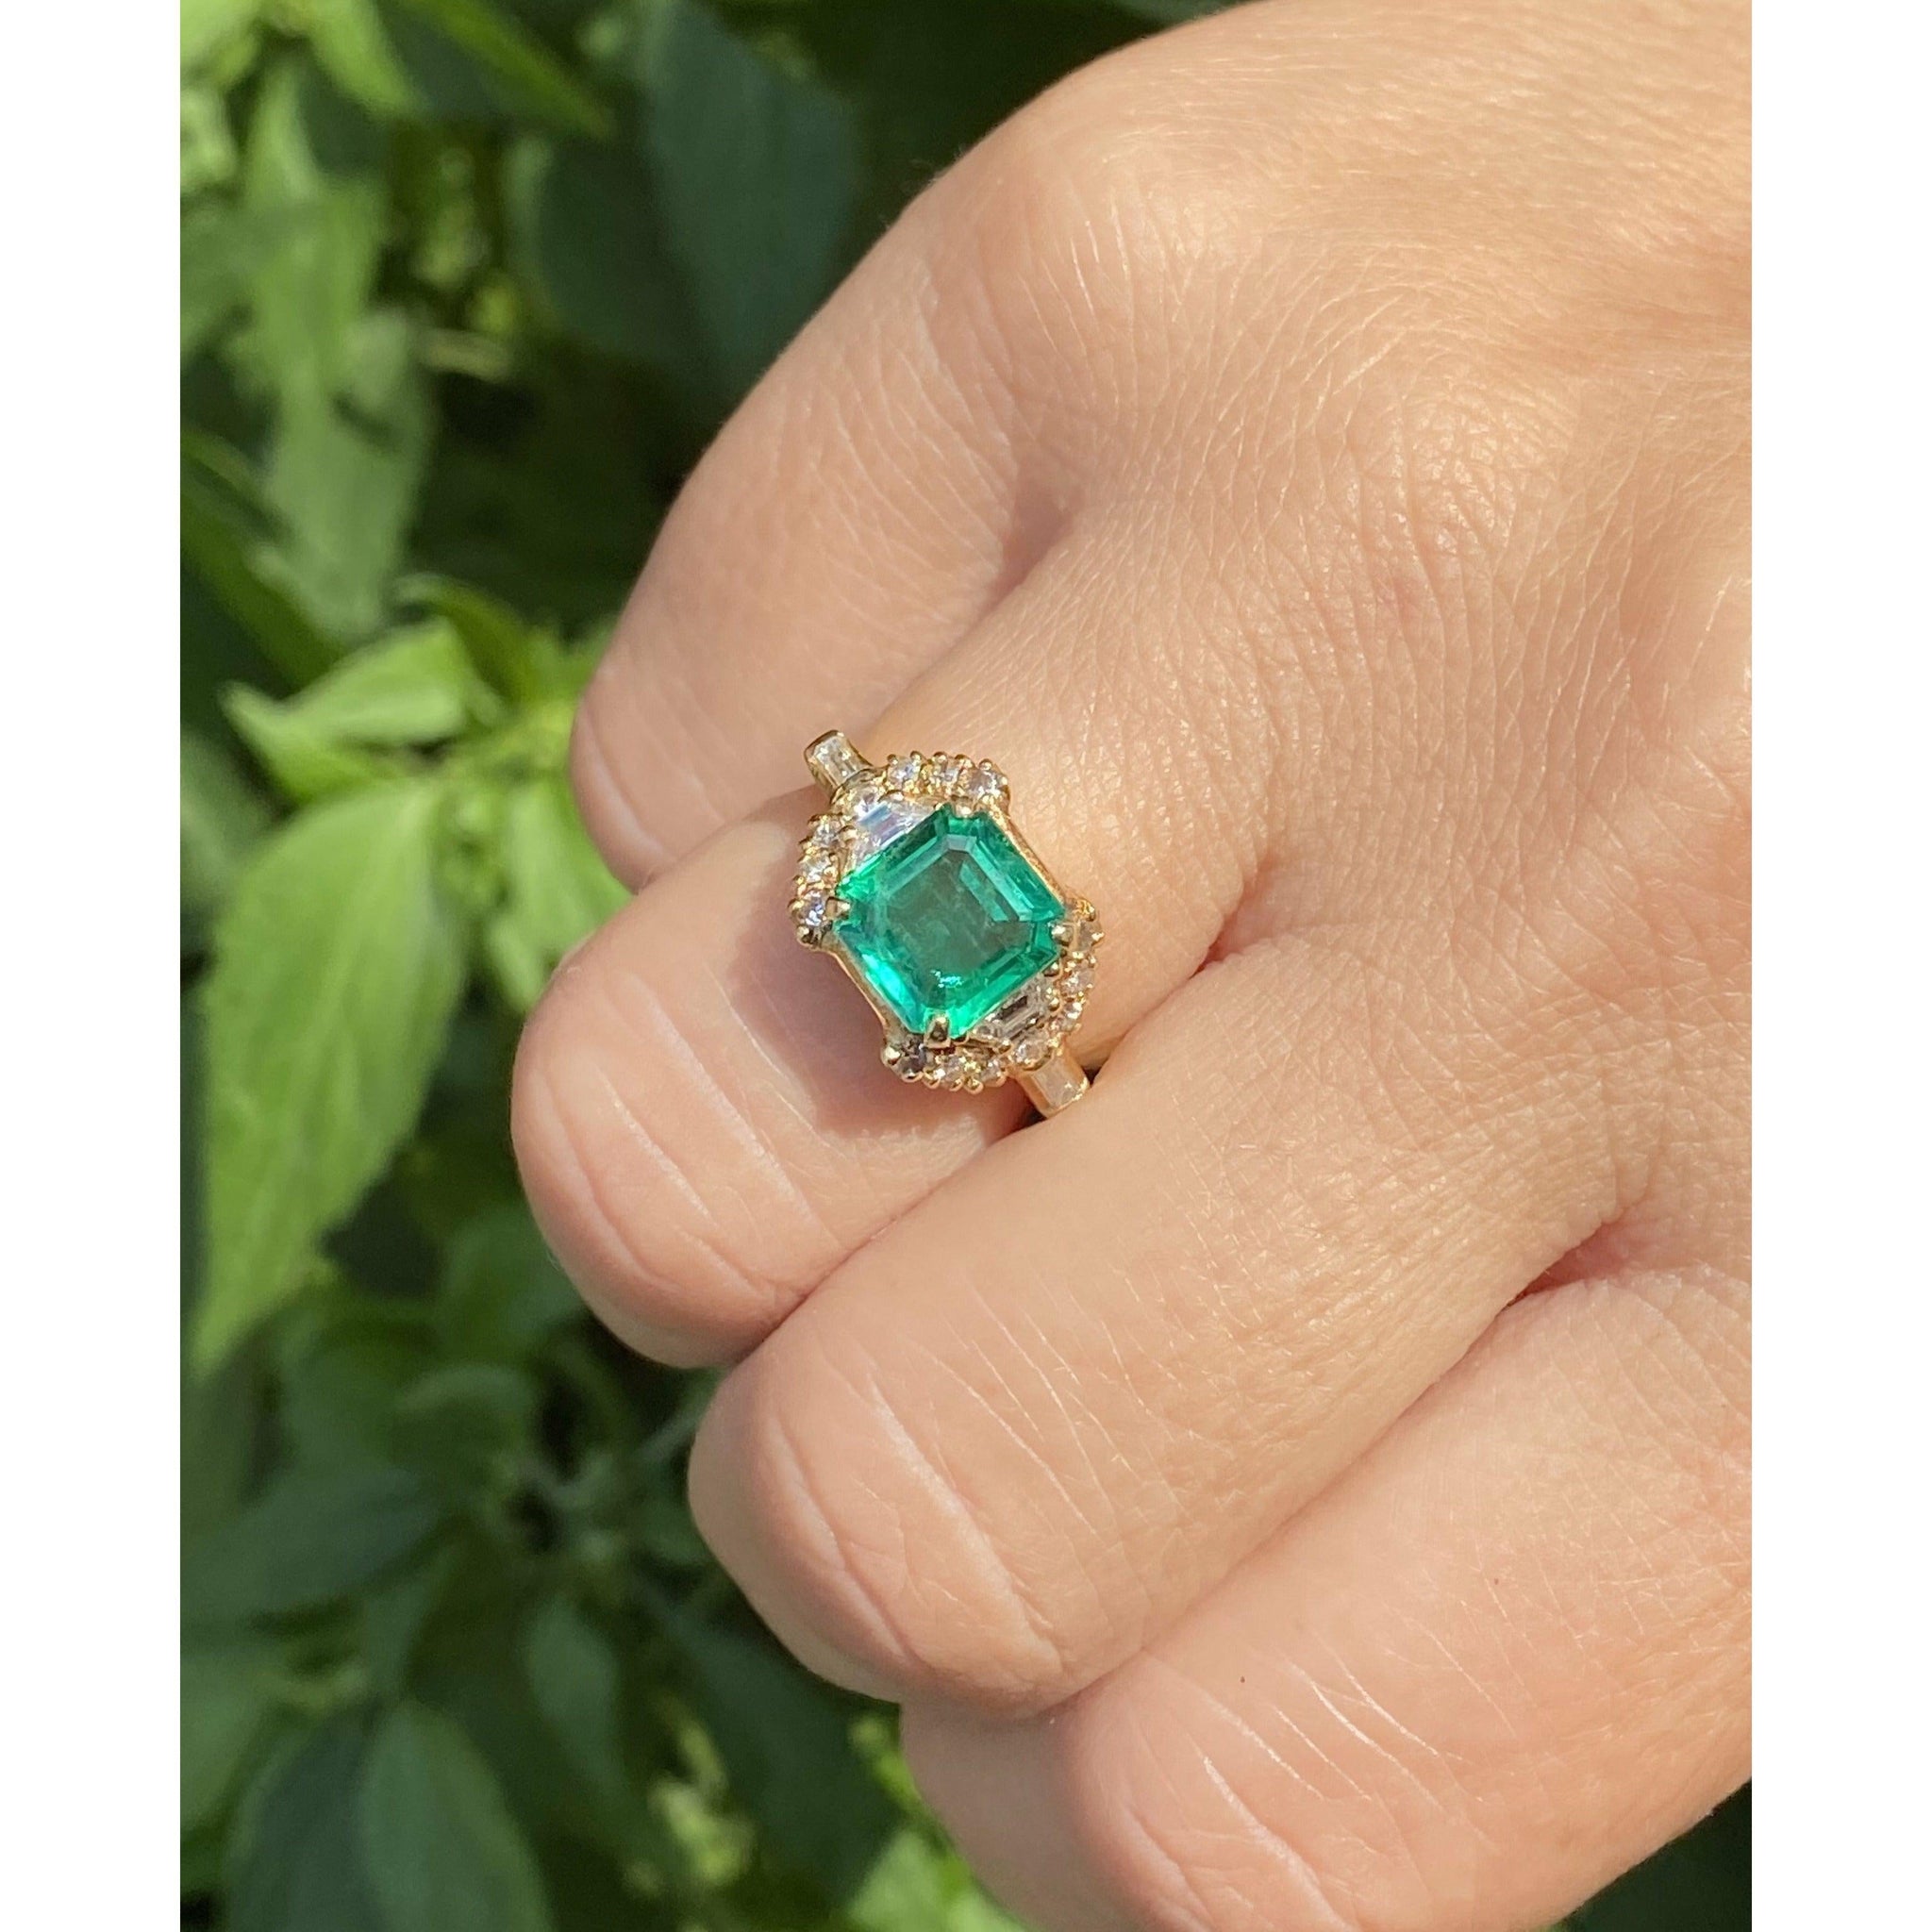 GRS Certified, 2.09 Carat Natural Colombian Emerald Set in 18k Solid Gold Ring - ASSAY